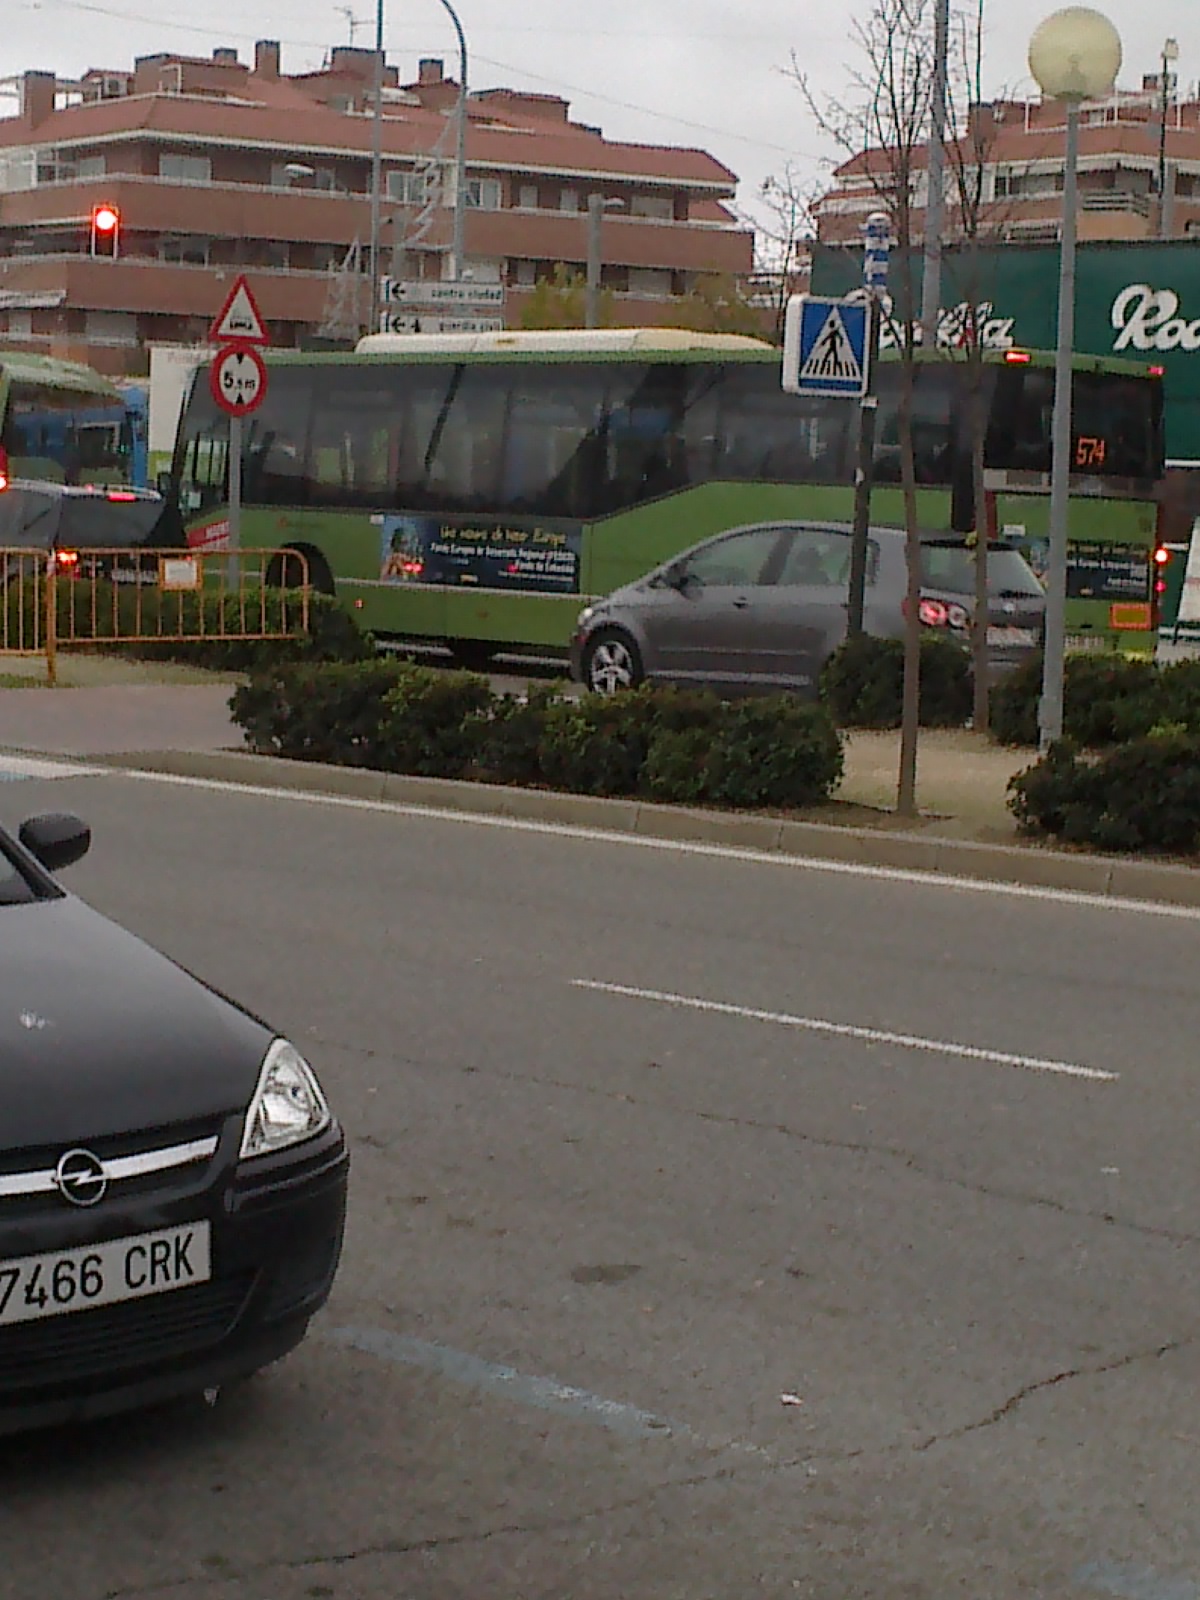 Lateral of bus, with the back of the campaign for the structural fund of the sustainable development